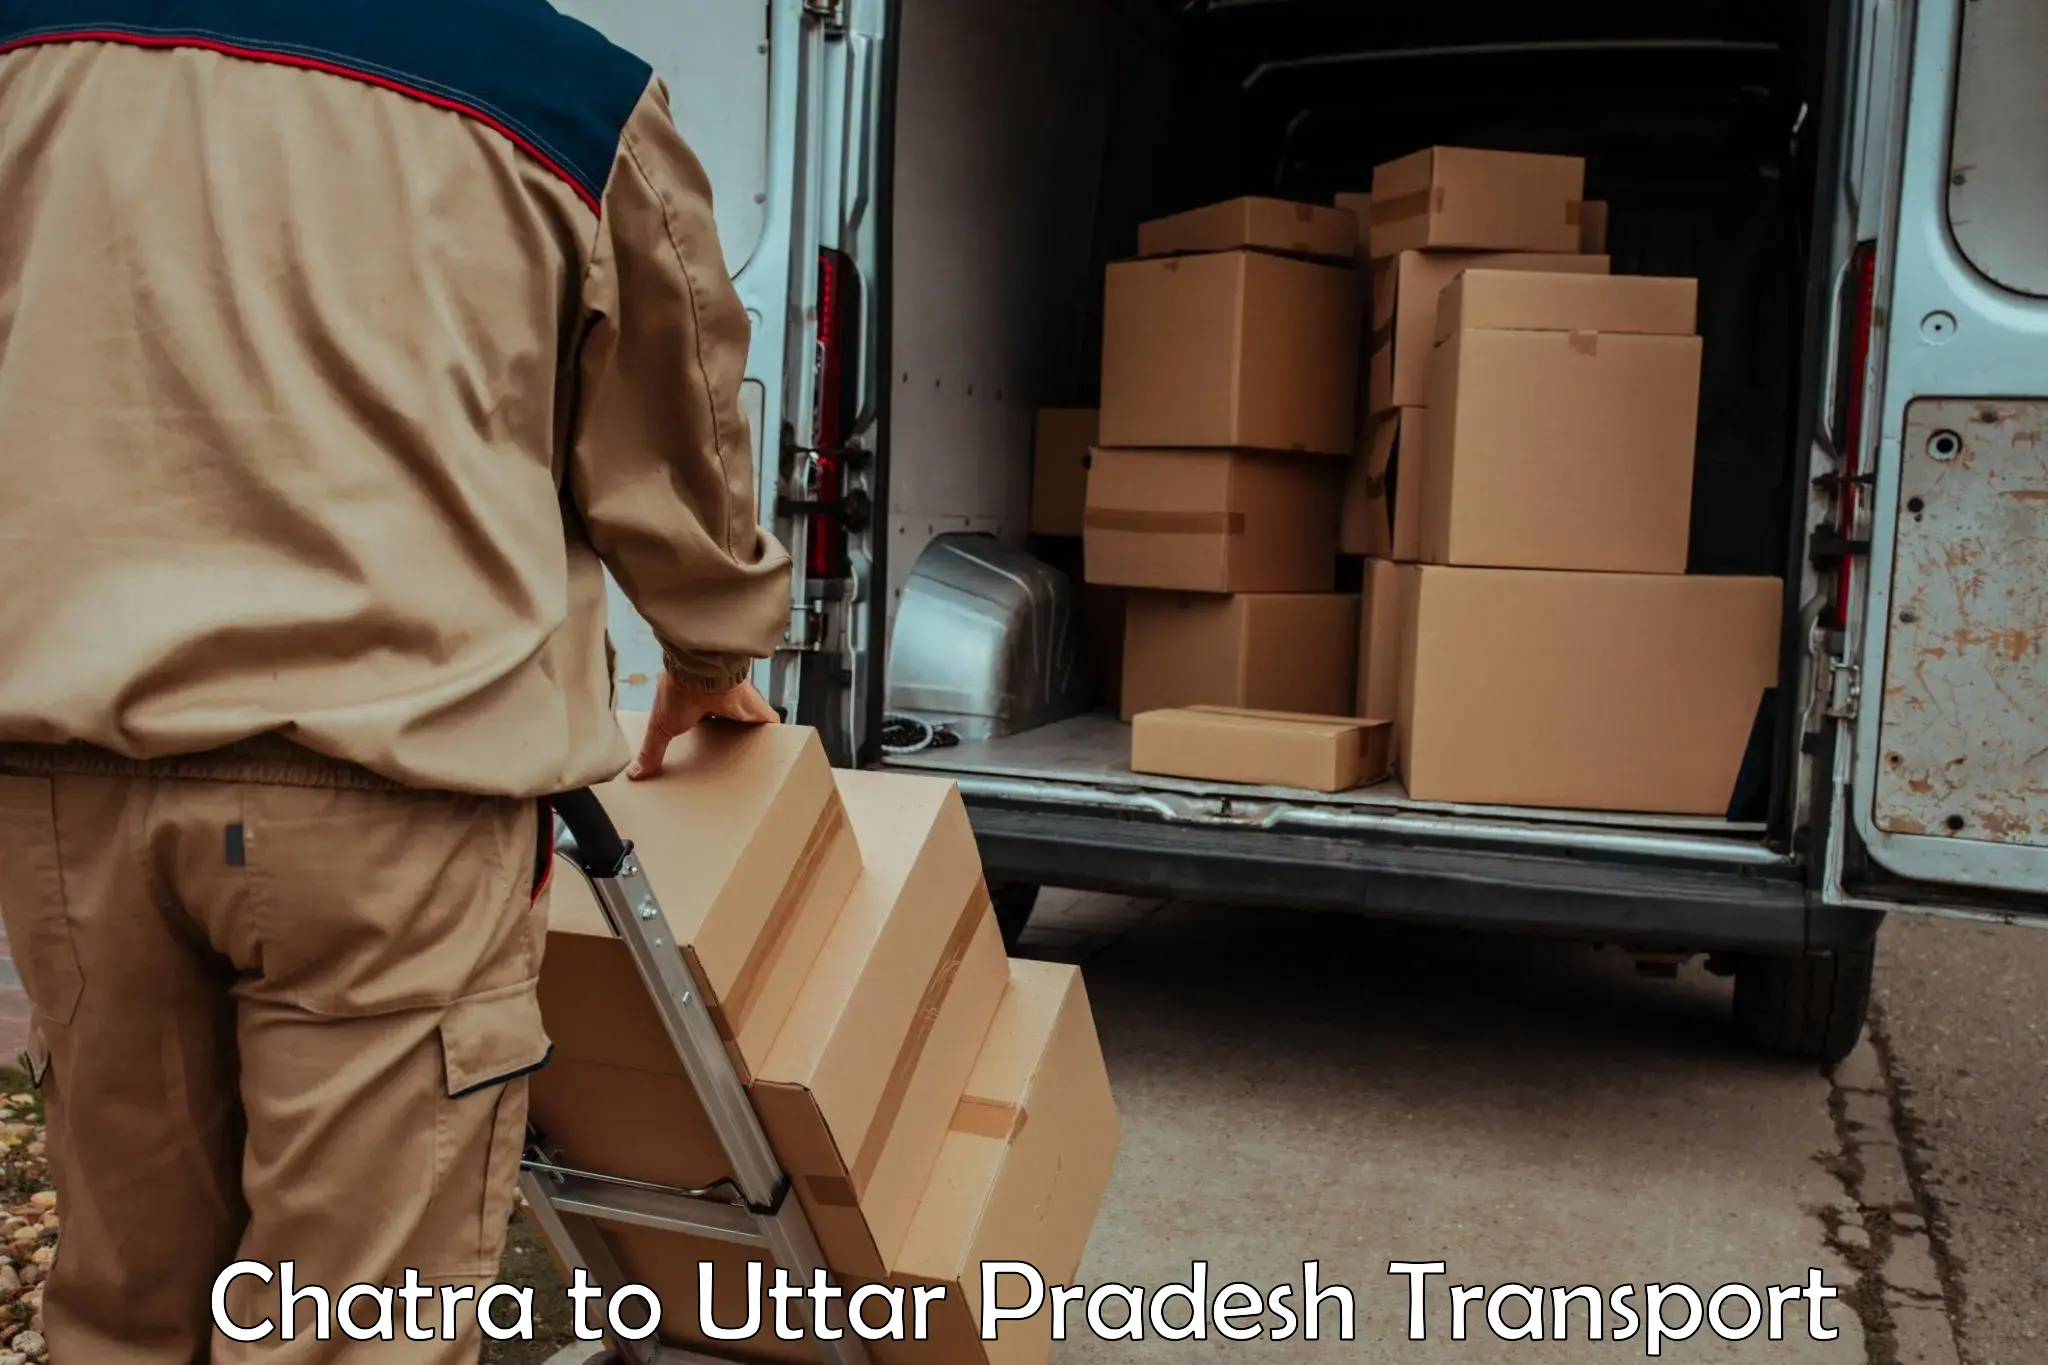 Truck transport companies in India Chatra to Akbarpur